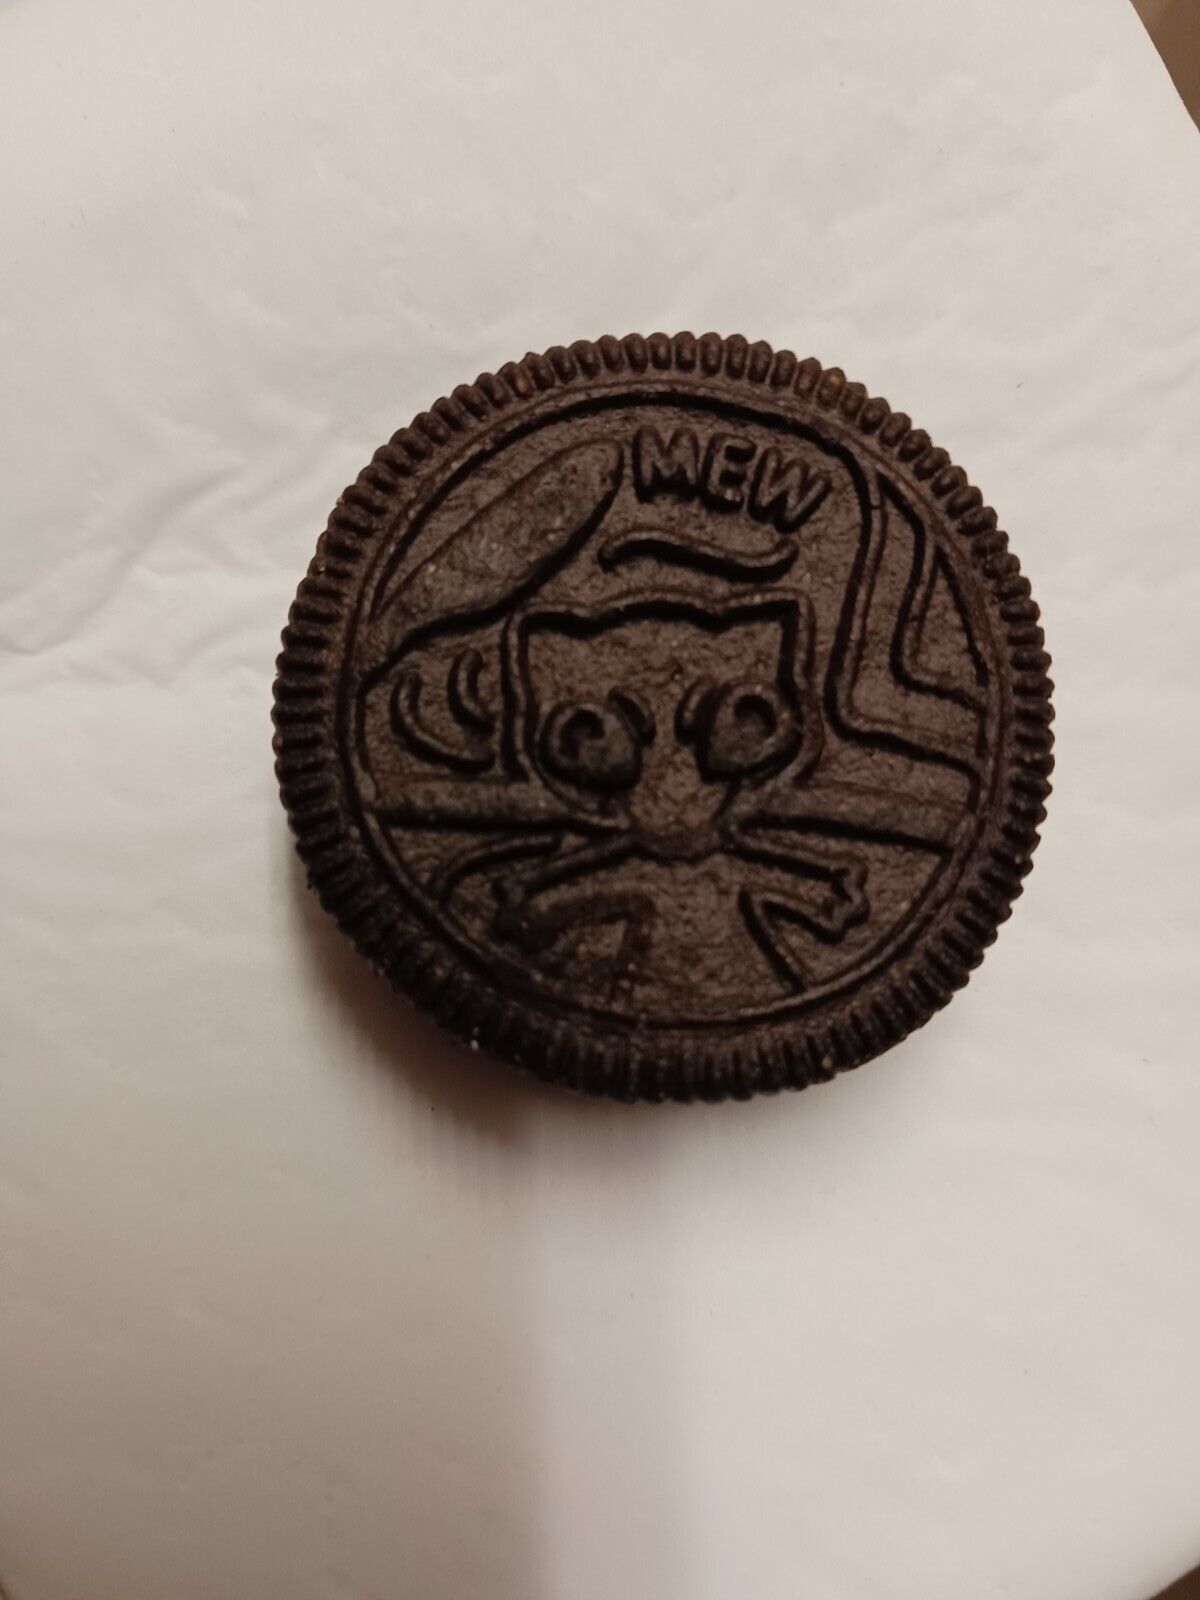 Rare MEW Pokemon Limited Edition Oreo Cookie Excellent Condition